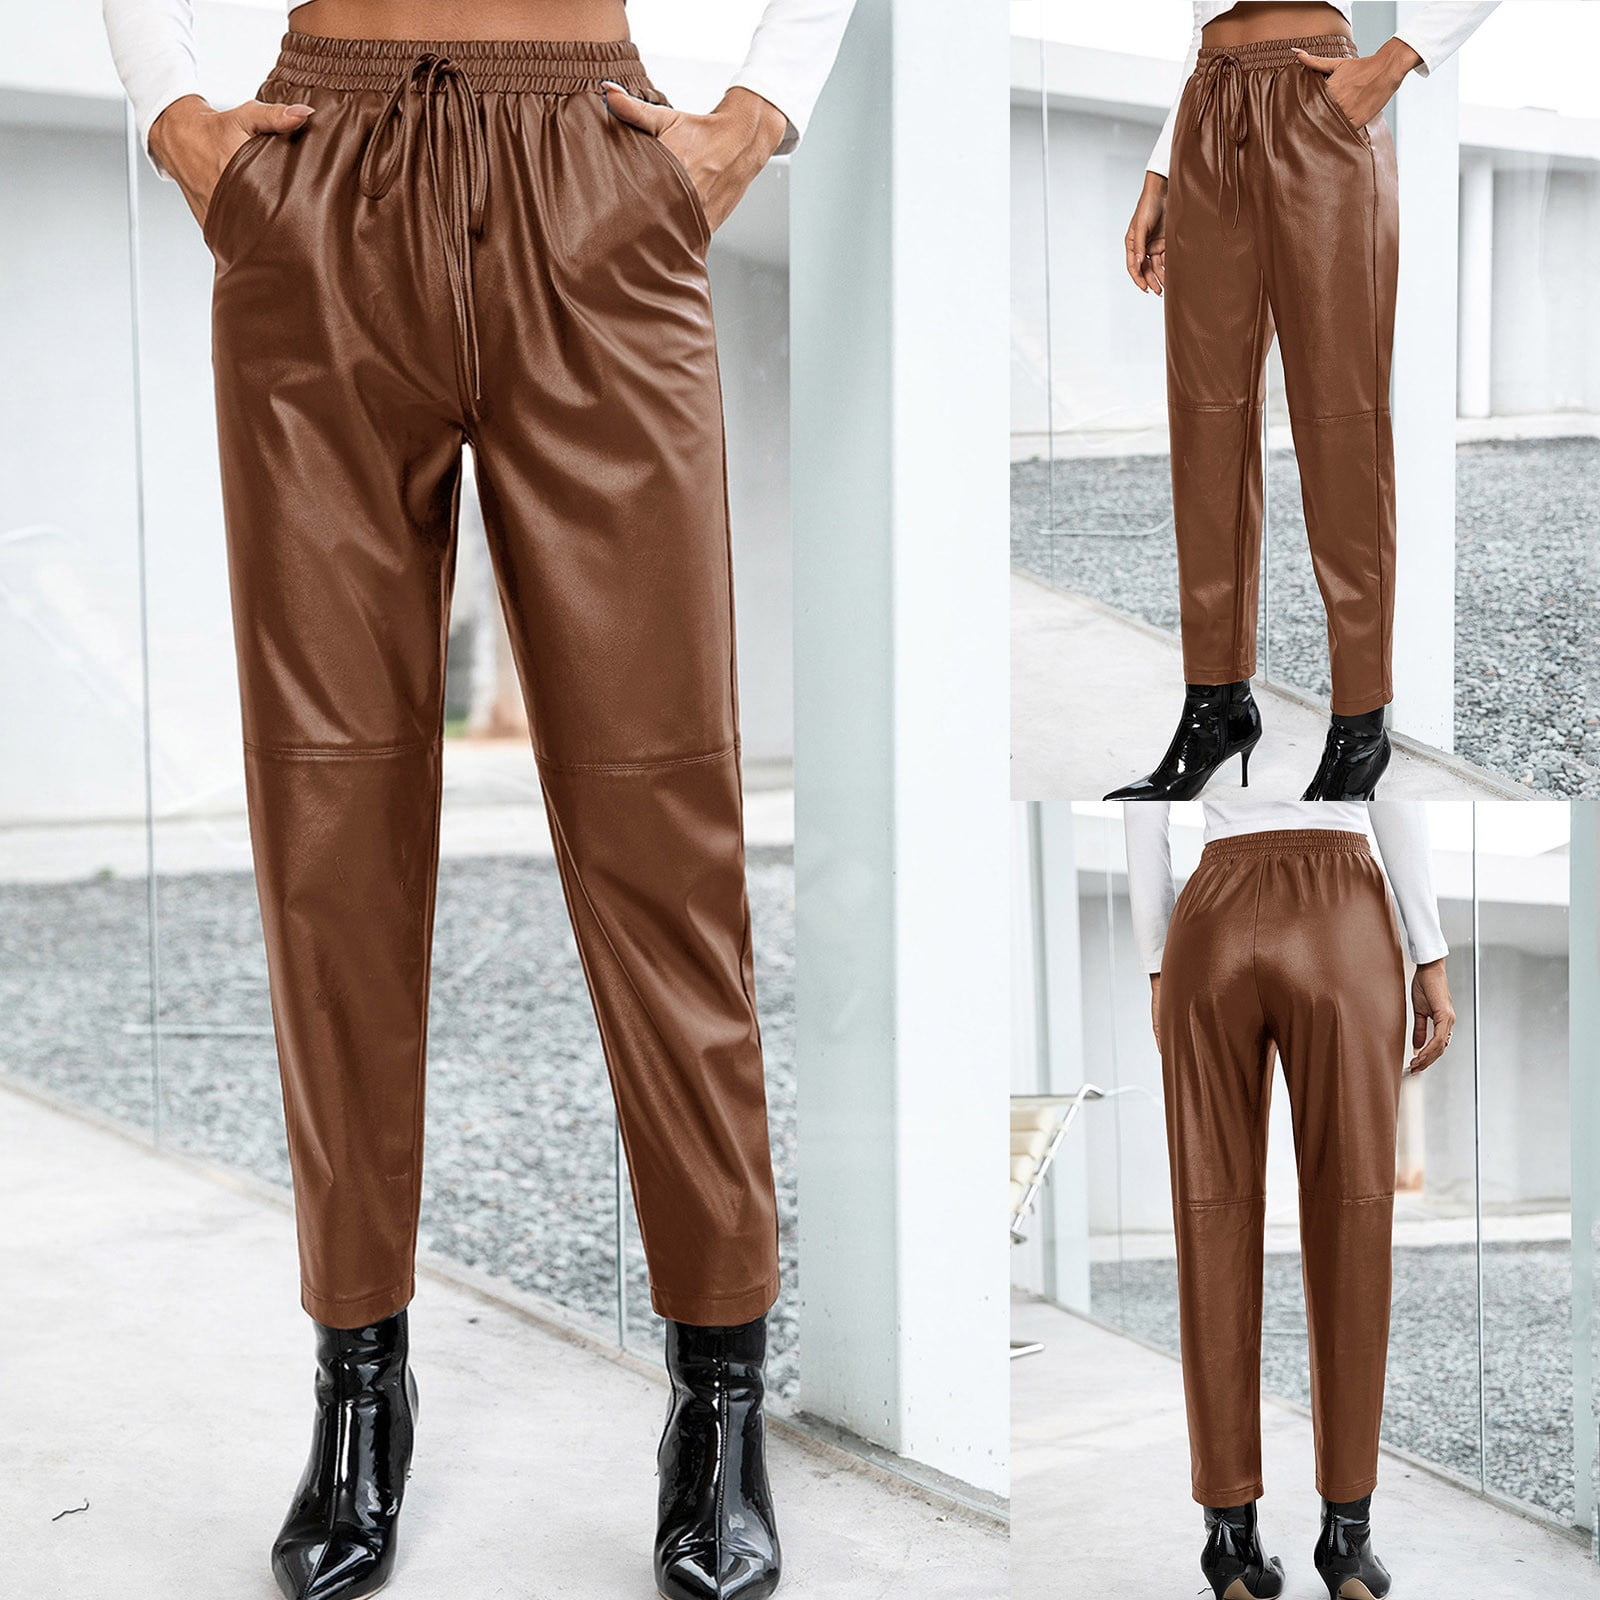 Scoop Girls Faux Leather Flare Leggings, Sizes 4-18 